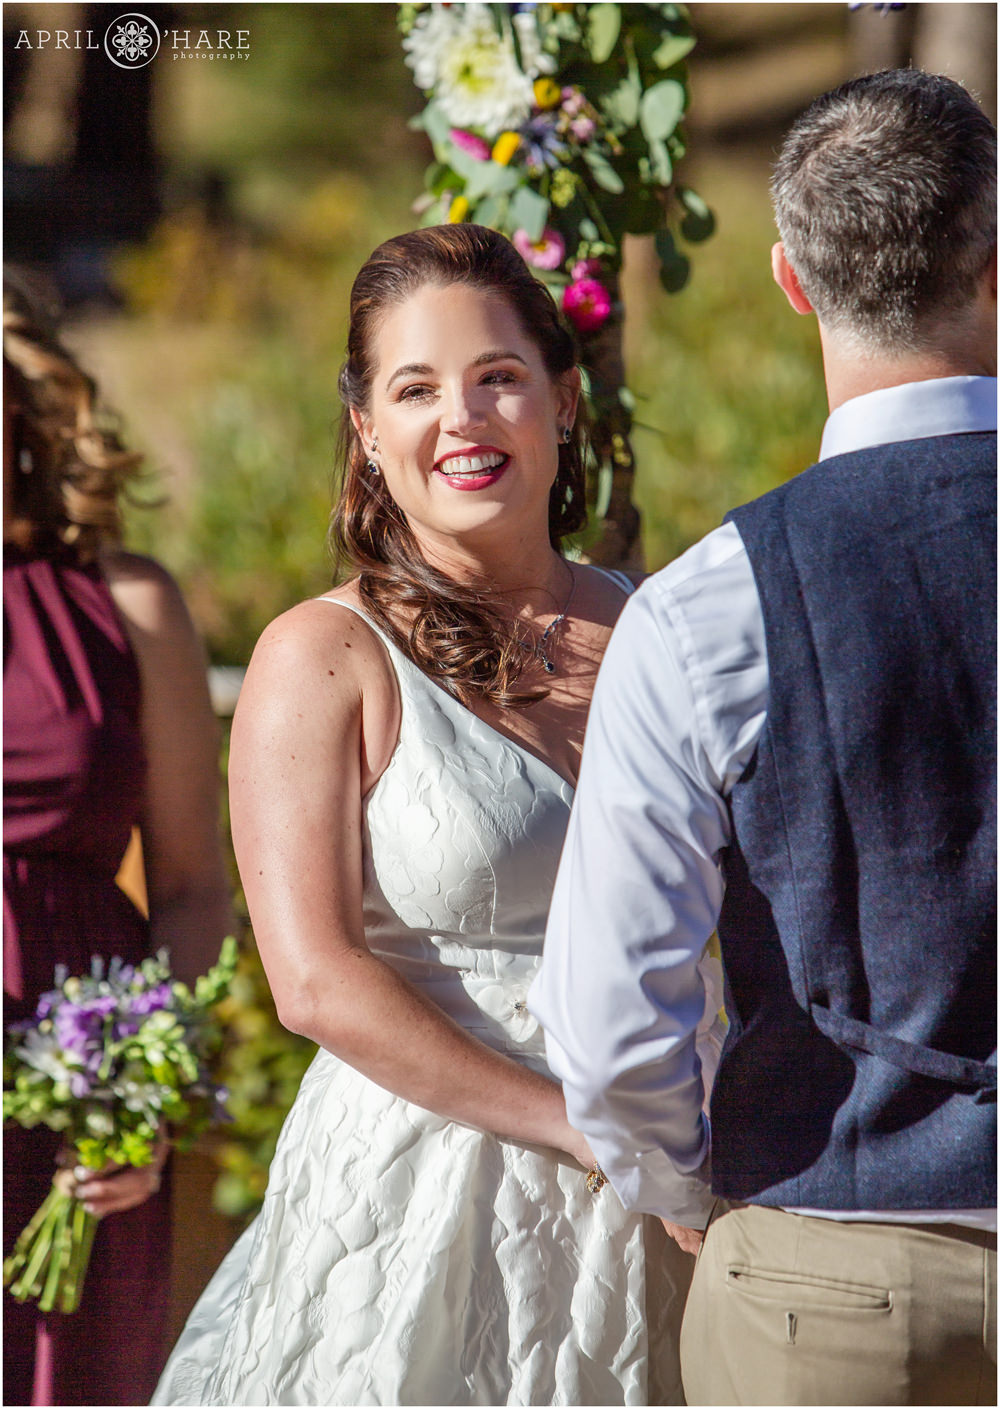 Bride smiles at her outdoor wedding ceremony on a bright sunny day in September